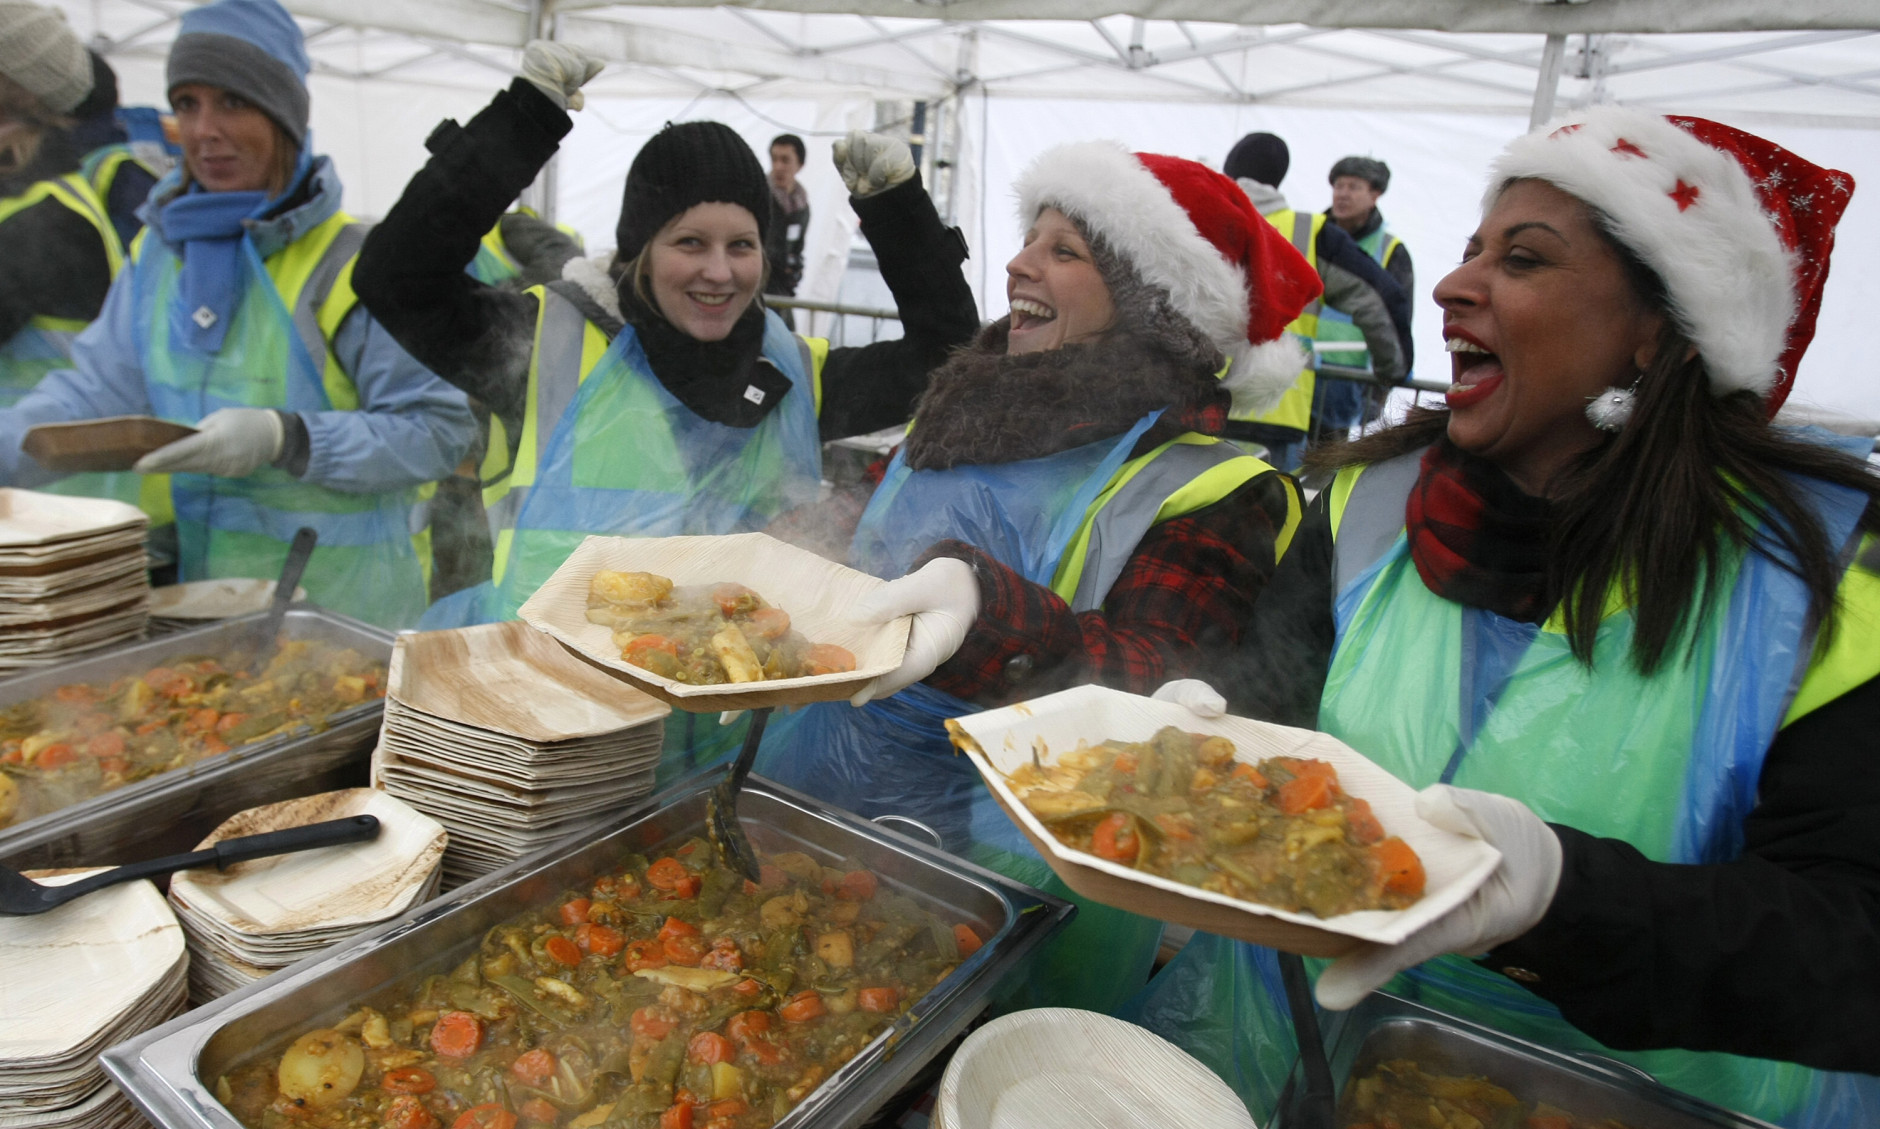 Volunteers serve lunch of vegetable curry to the public during an event to highlight  food waste in Trafalgar Square, London Wednesday Dec. 16, 2009. Campaigners, charities and prominent supporters will serve a free lunch to 5000 members of the public to draw attention to the problem of food waste.  The free lunch will be made entirely out of fresh food that would otherwise have been thrown away in an attempt to highlight how much food gets wasted every day  and the impact that has on the environment. It is estimated that rich countries like the UK currently waste up to half their food supplies.  (AP Photo/Alastair Grant)